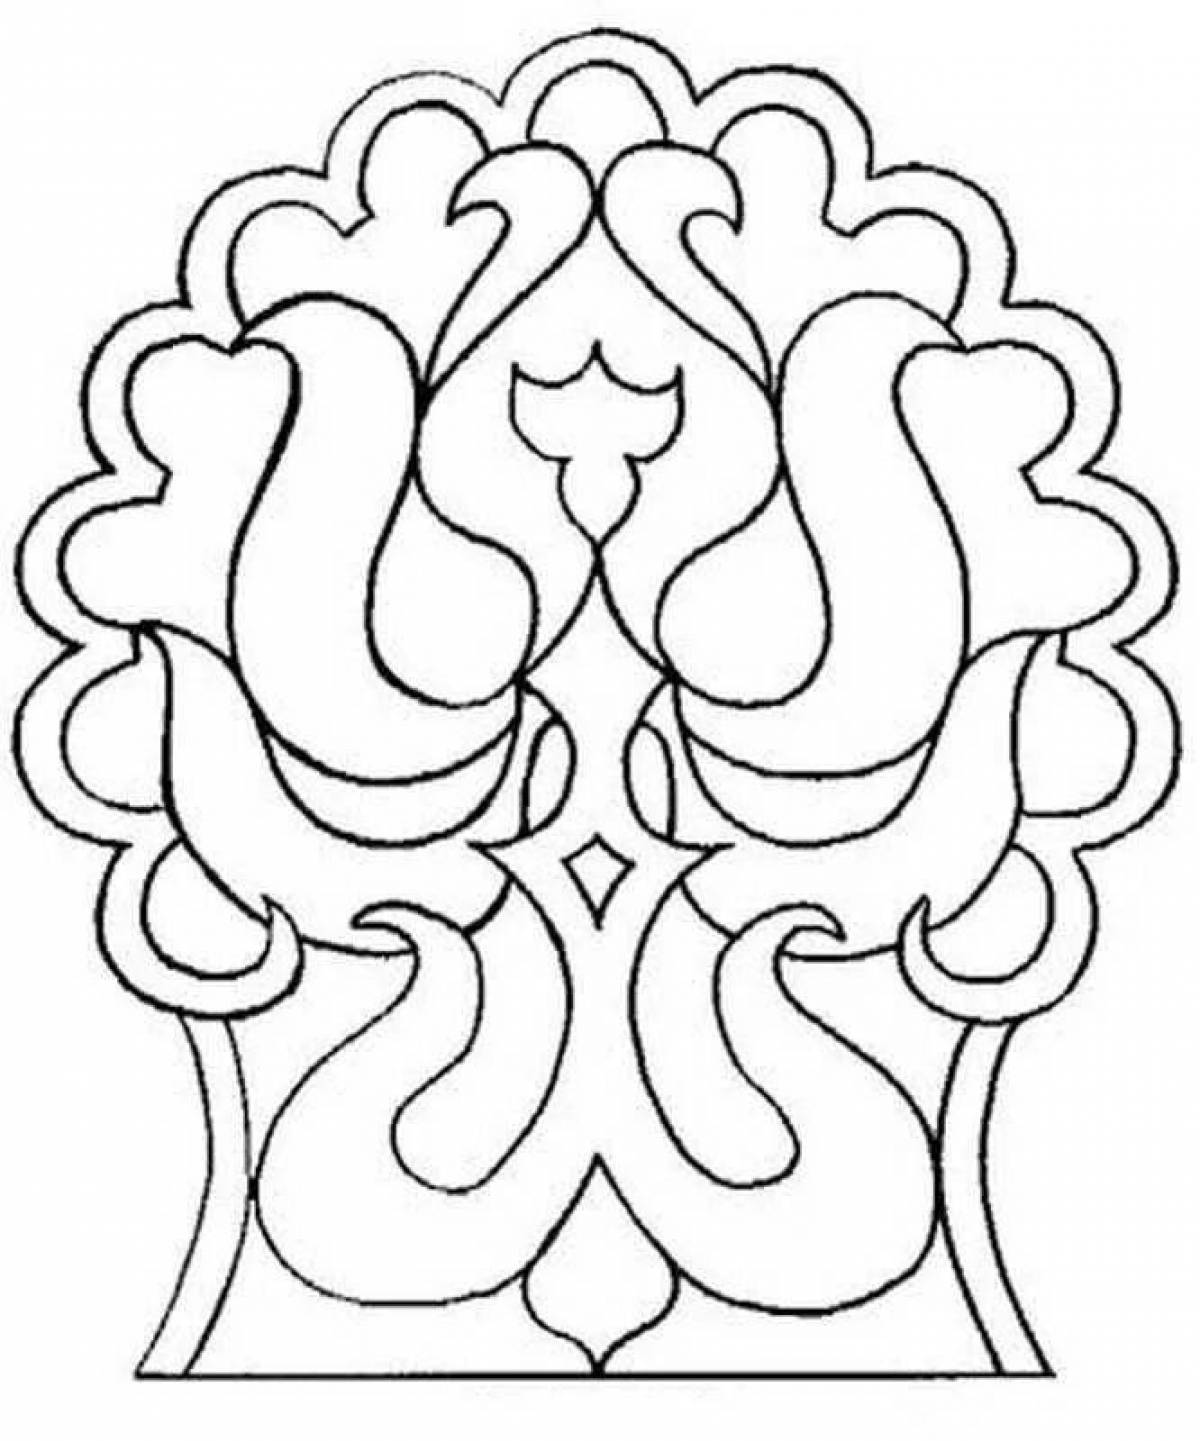 Coloring page playful tatar ornament